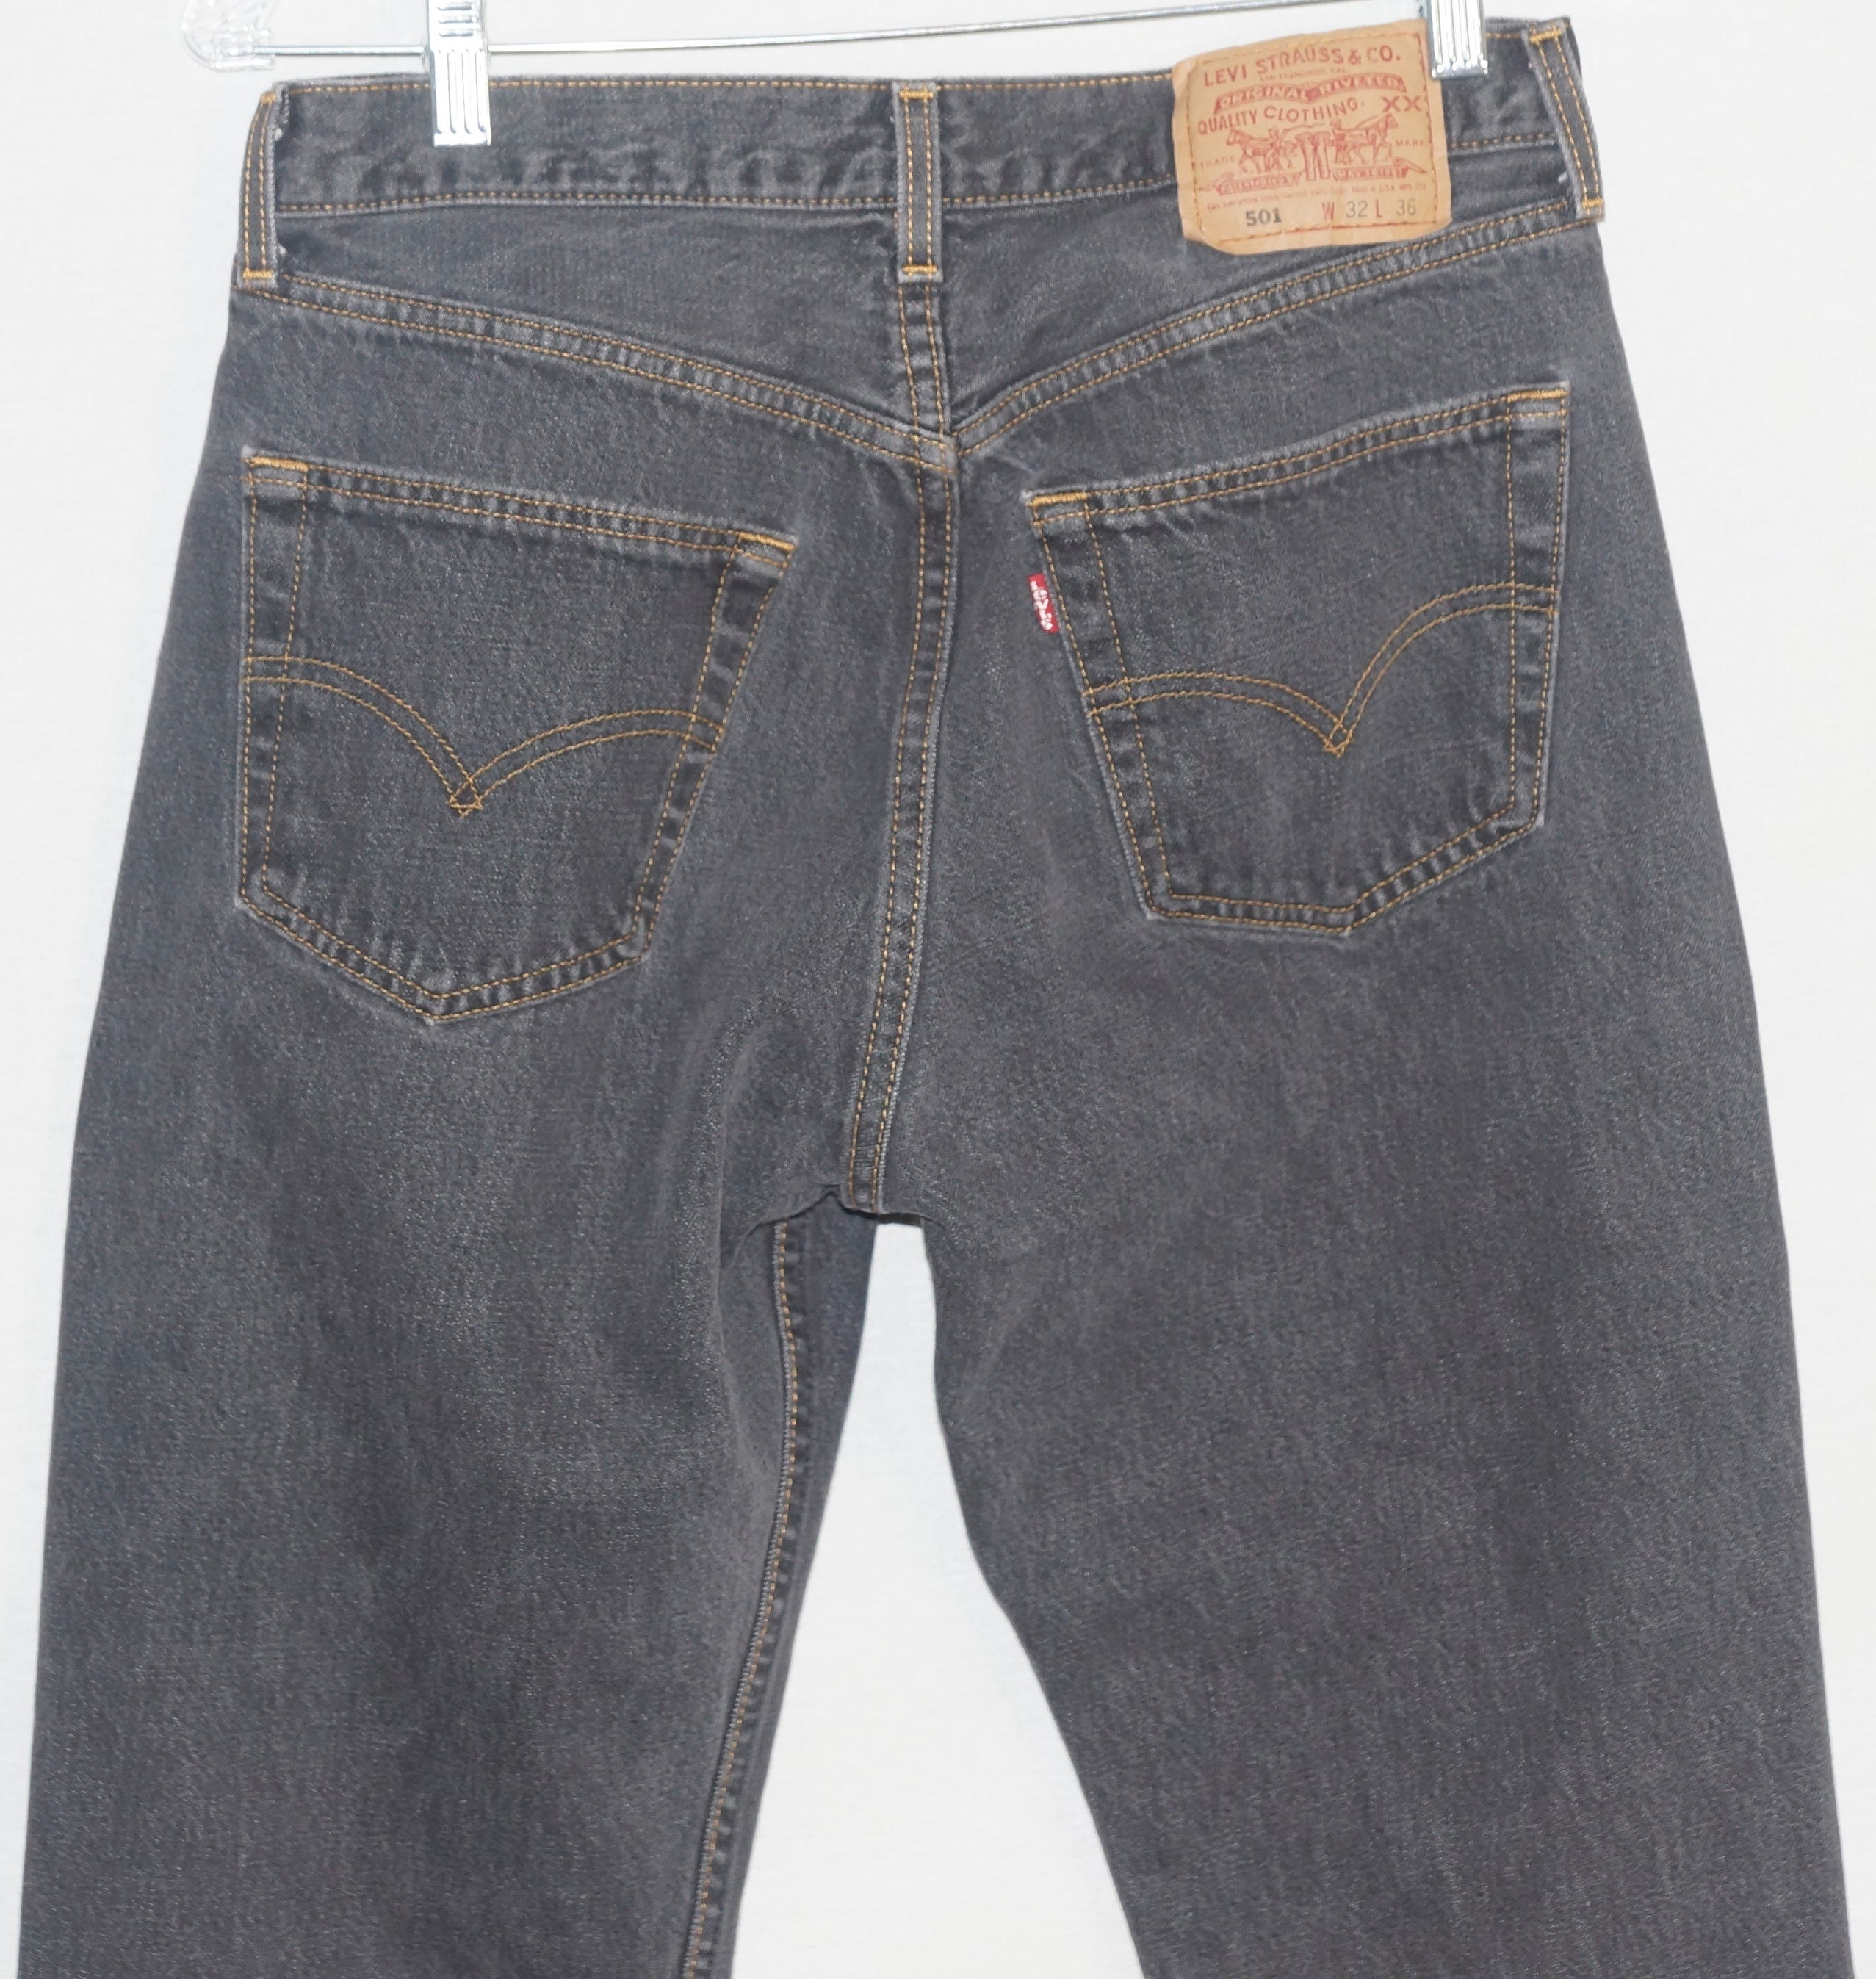 1980's 501 Levi's Vintage Jeans Made in USA Red Tab Faded Black Denim ...